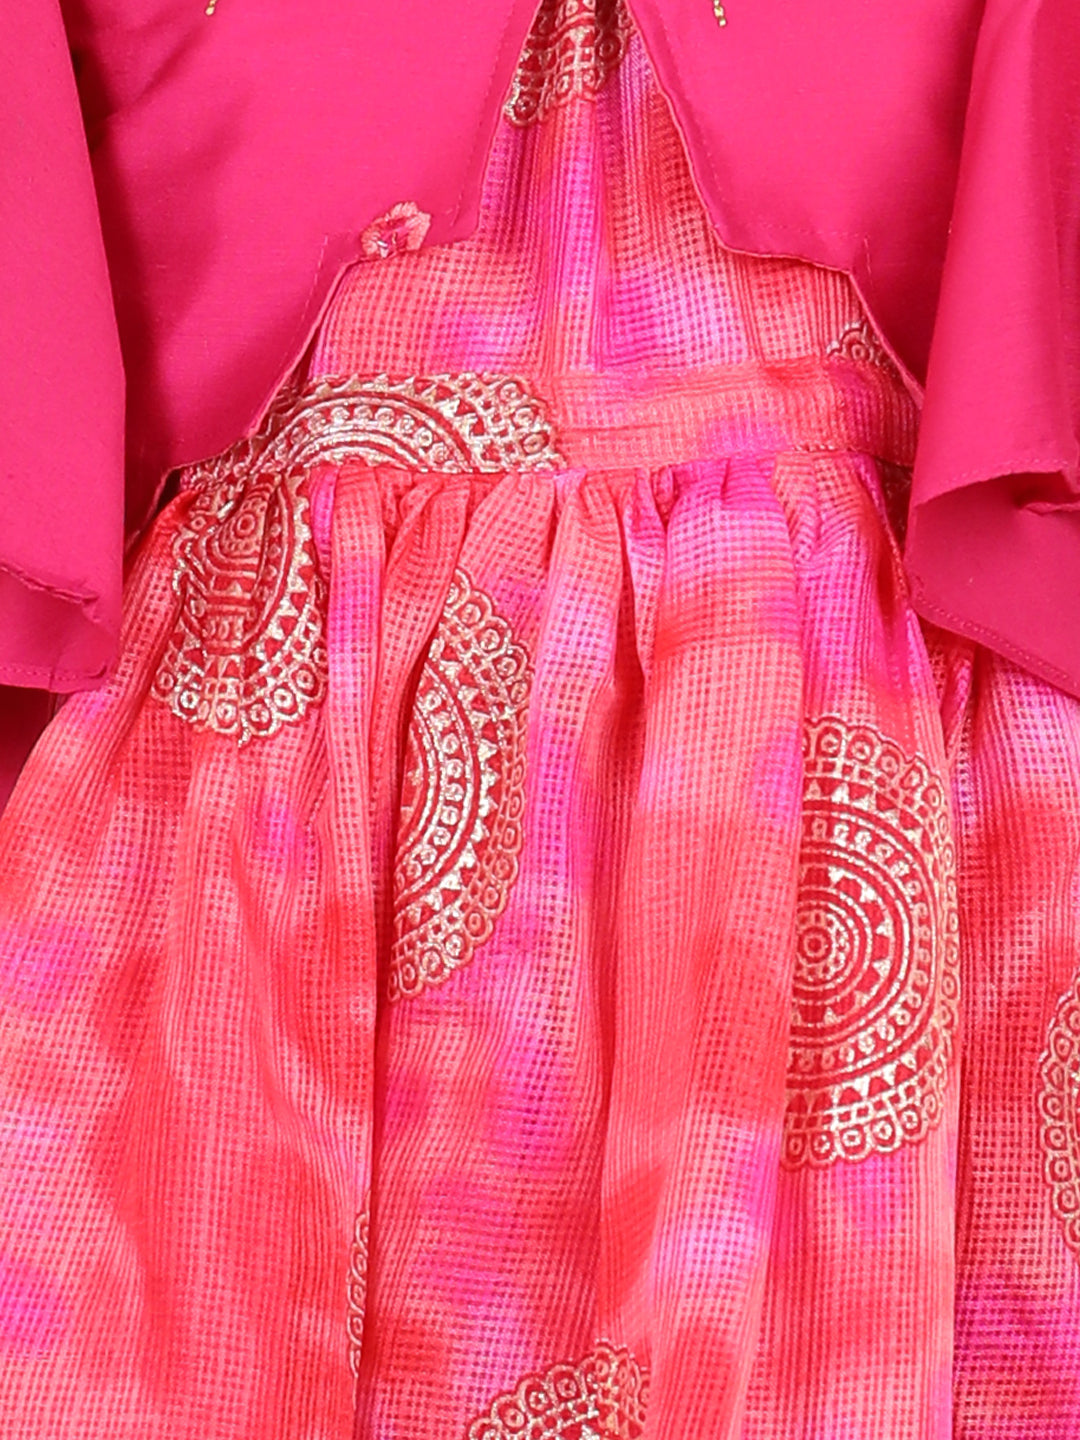 Pink Foil Printed dress with a embroidered jacket